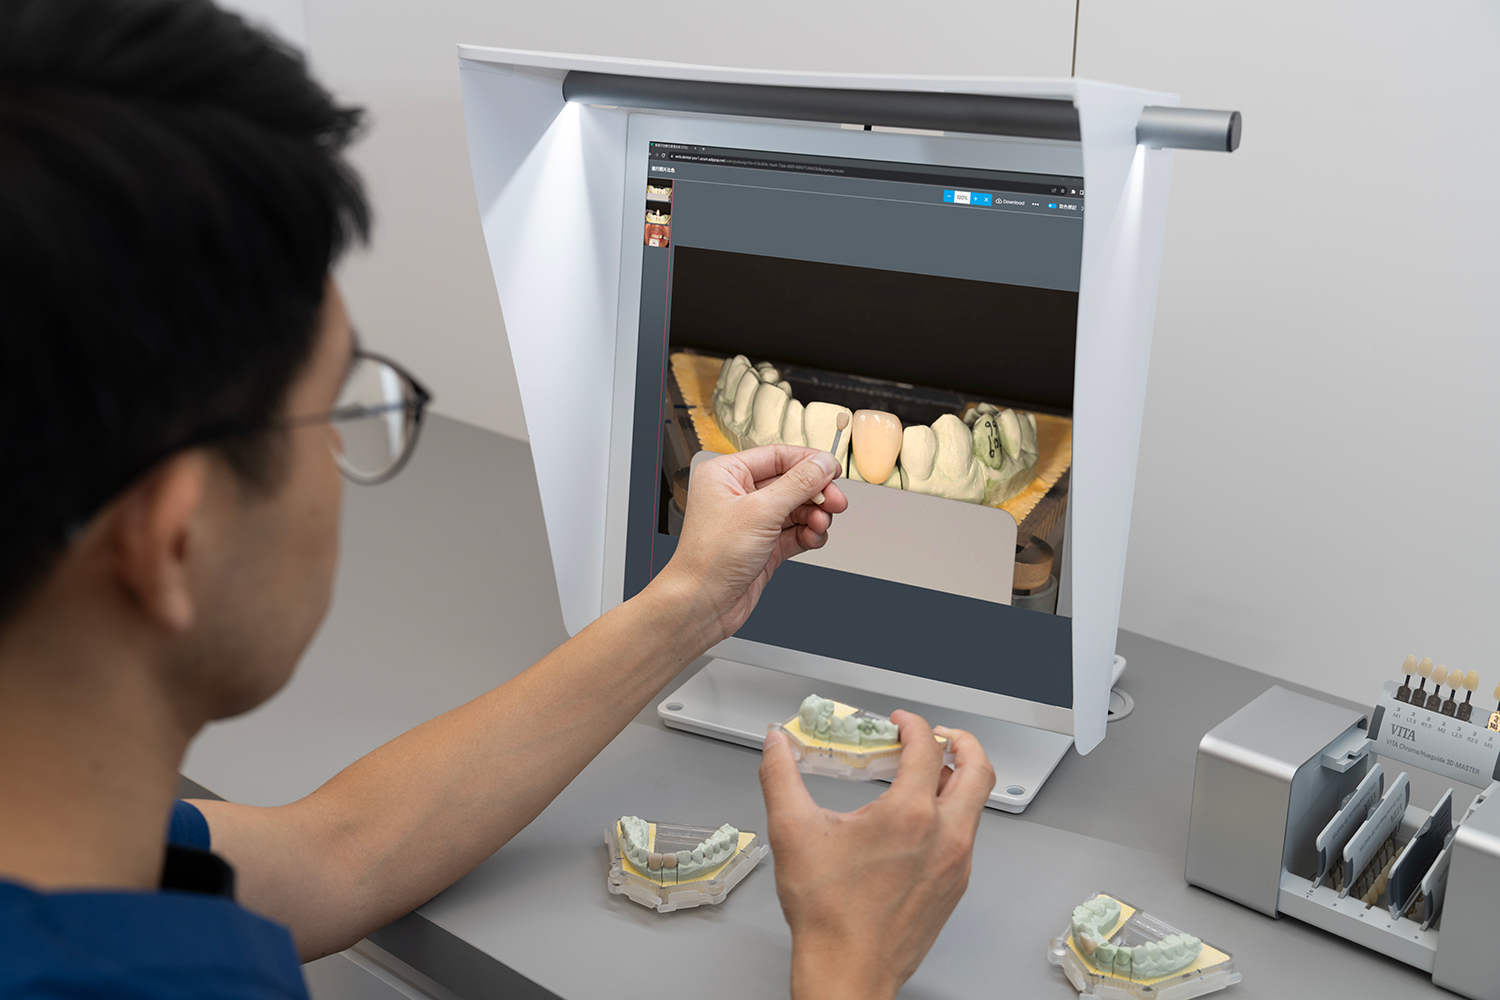 AUO Display Plus collaborates with Chien-Mei Medical Investigation in establishing “DentLabX,” unveiling its industry-leading smart dental management system, and assisting dental technicians in overseeing the complete denture fabrication and material adjustment process